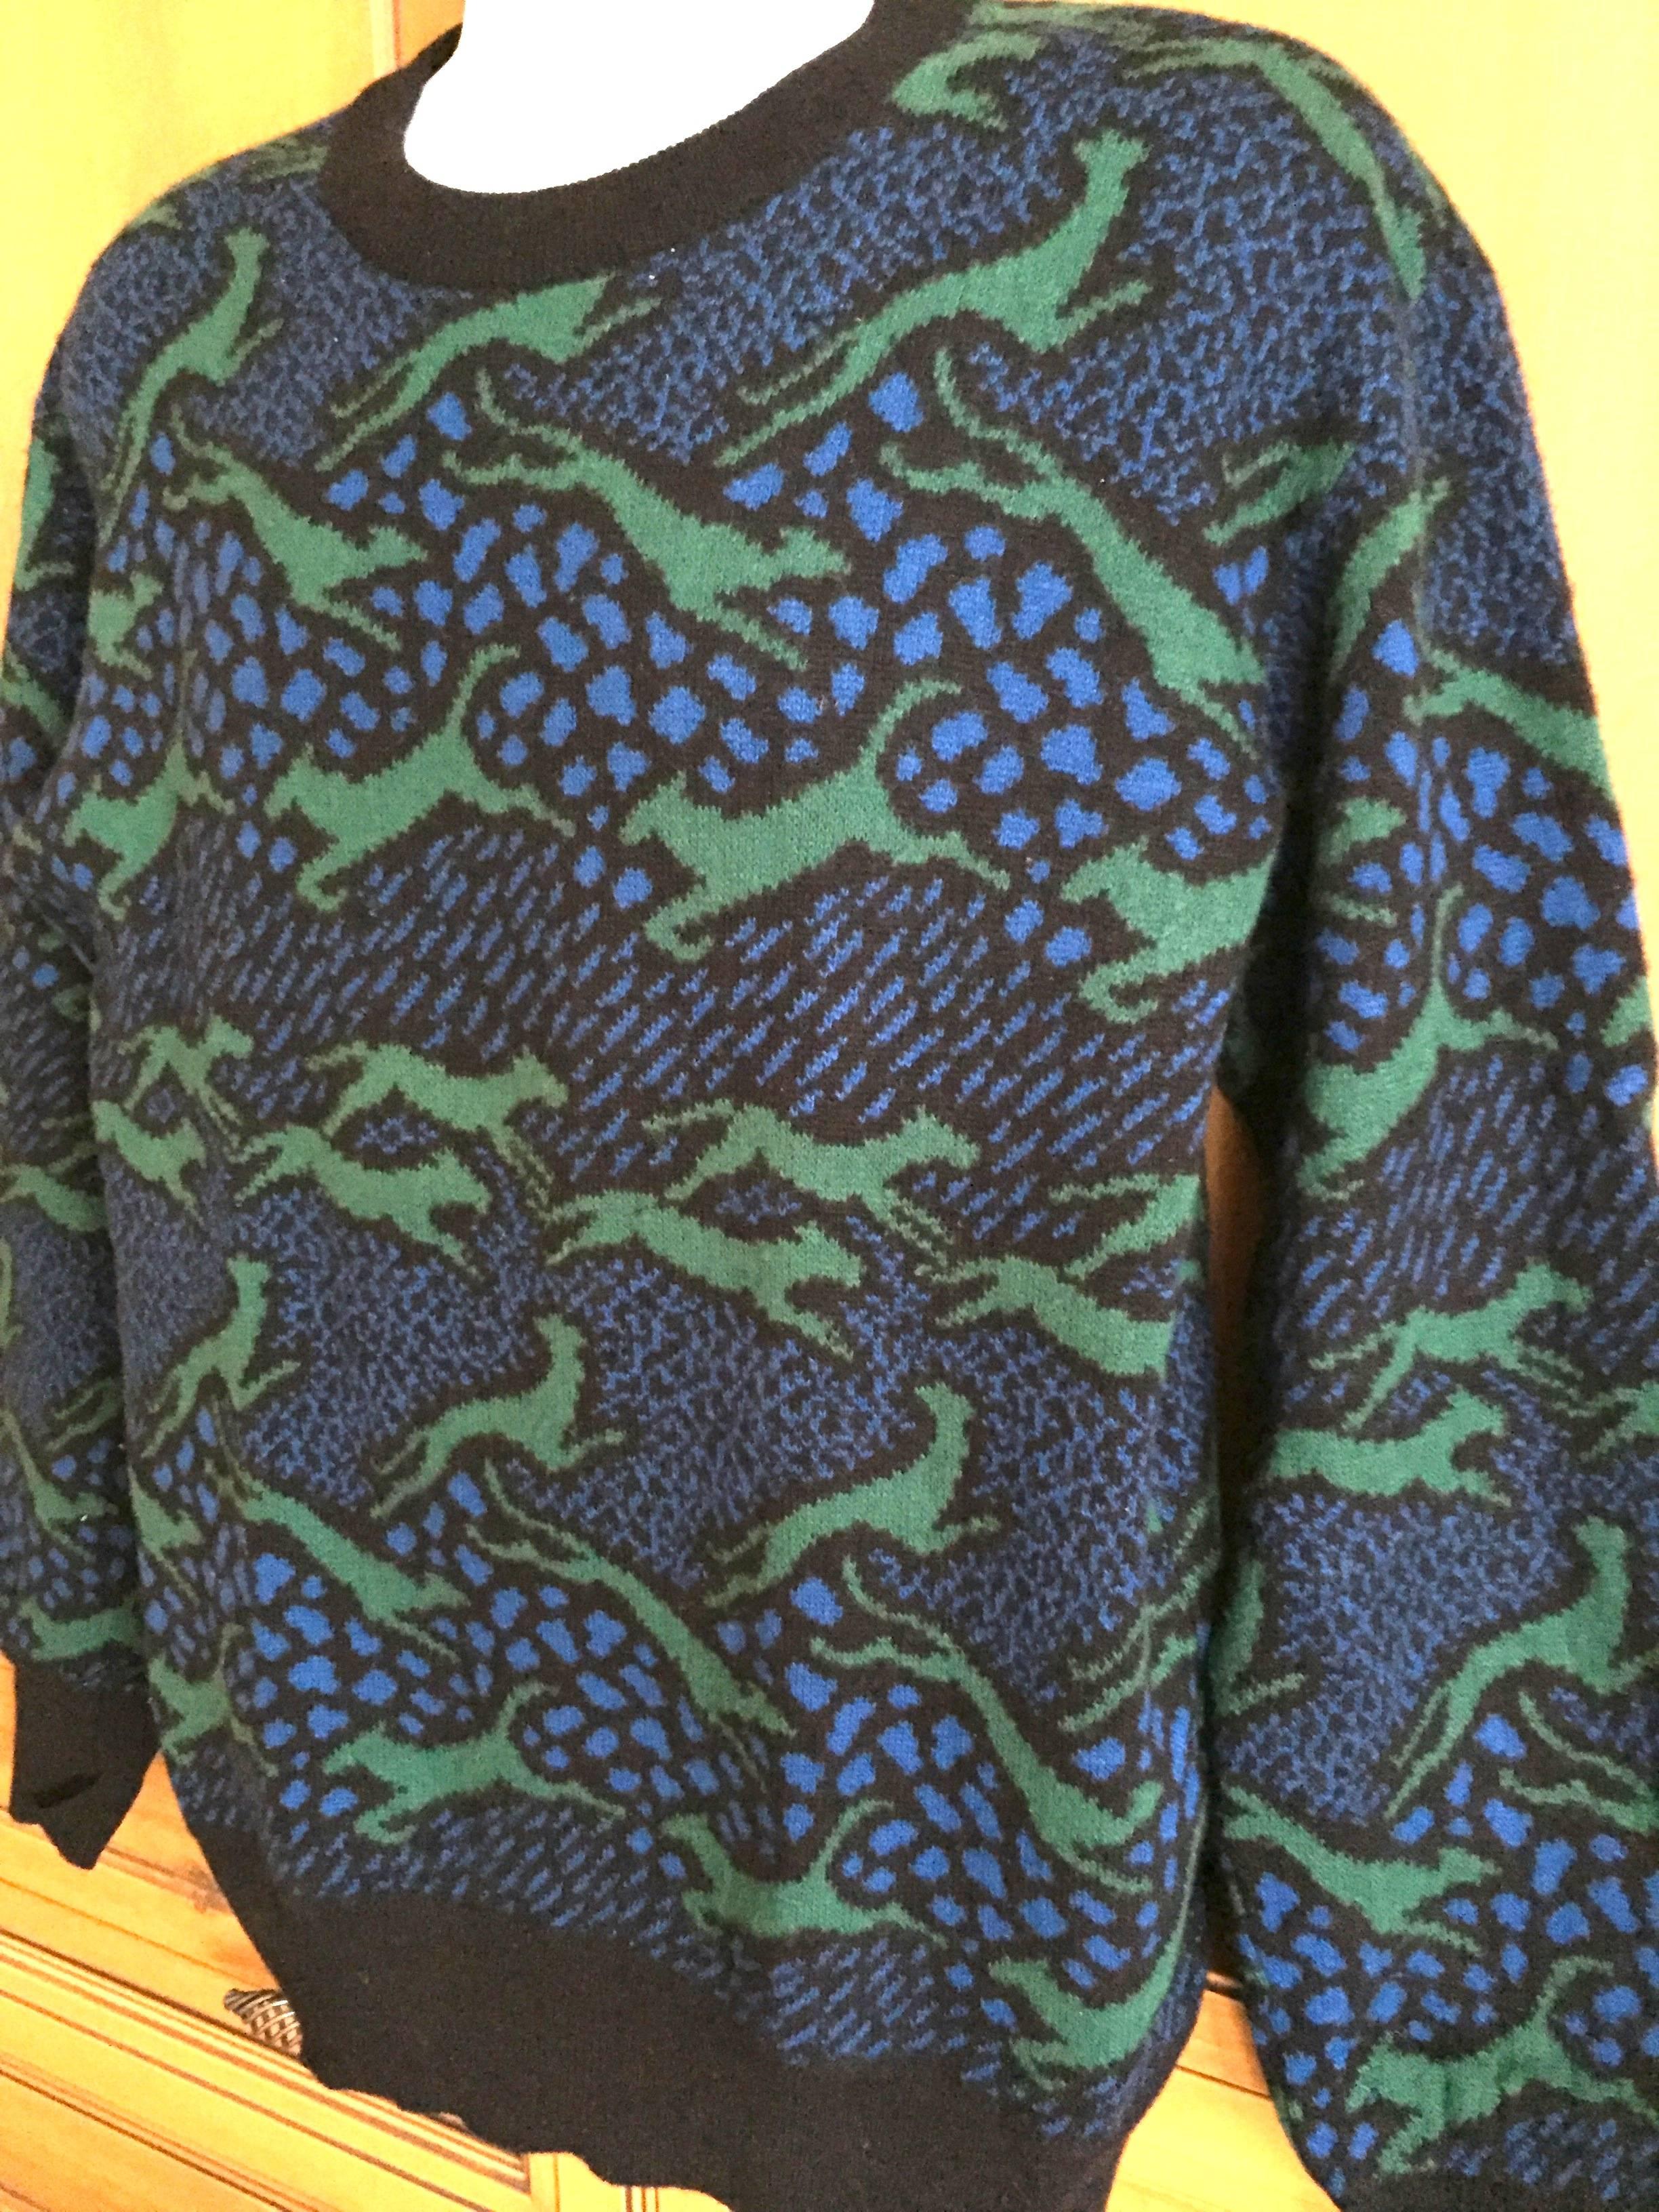 Missoni Uomo Delightful Stylized Dog Pattern Vintage Cashmere Mens Sweater.

1980's Missoni Uomo. 

Size M, seems to run large.

In excellent condition

Chest 48